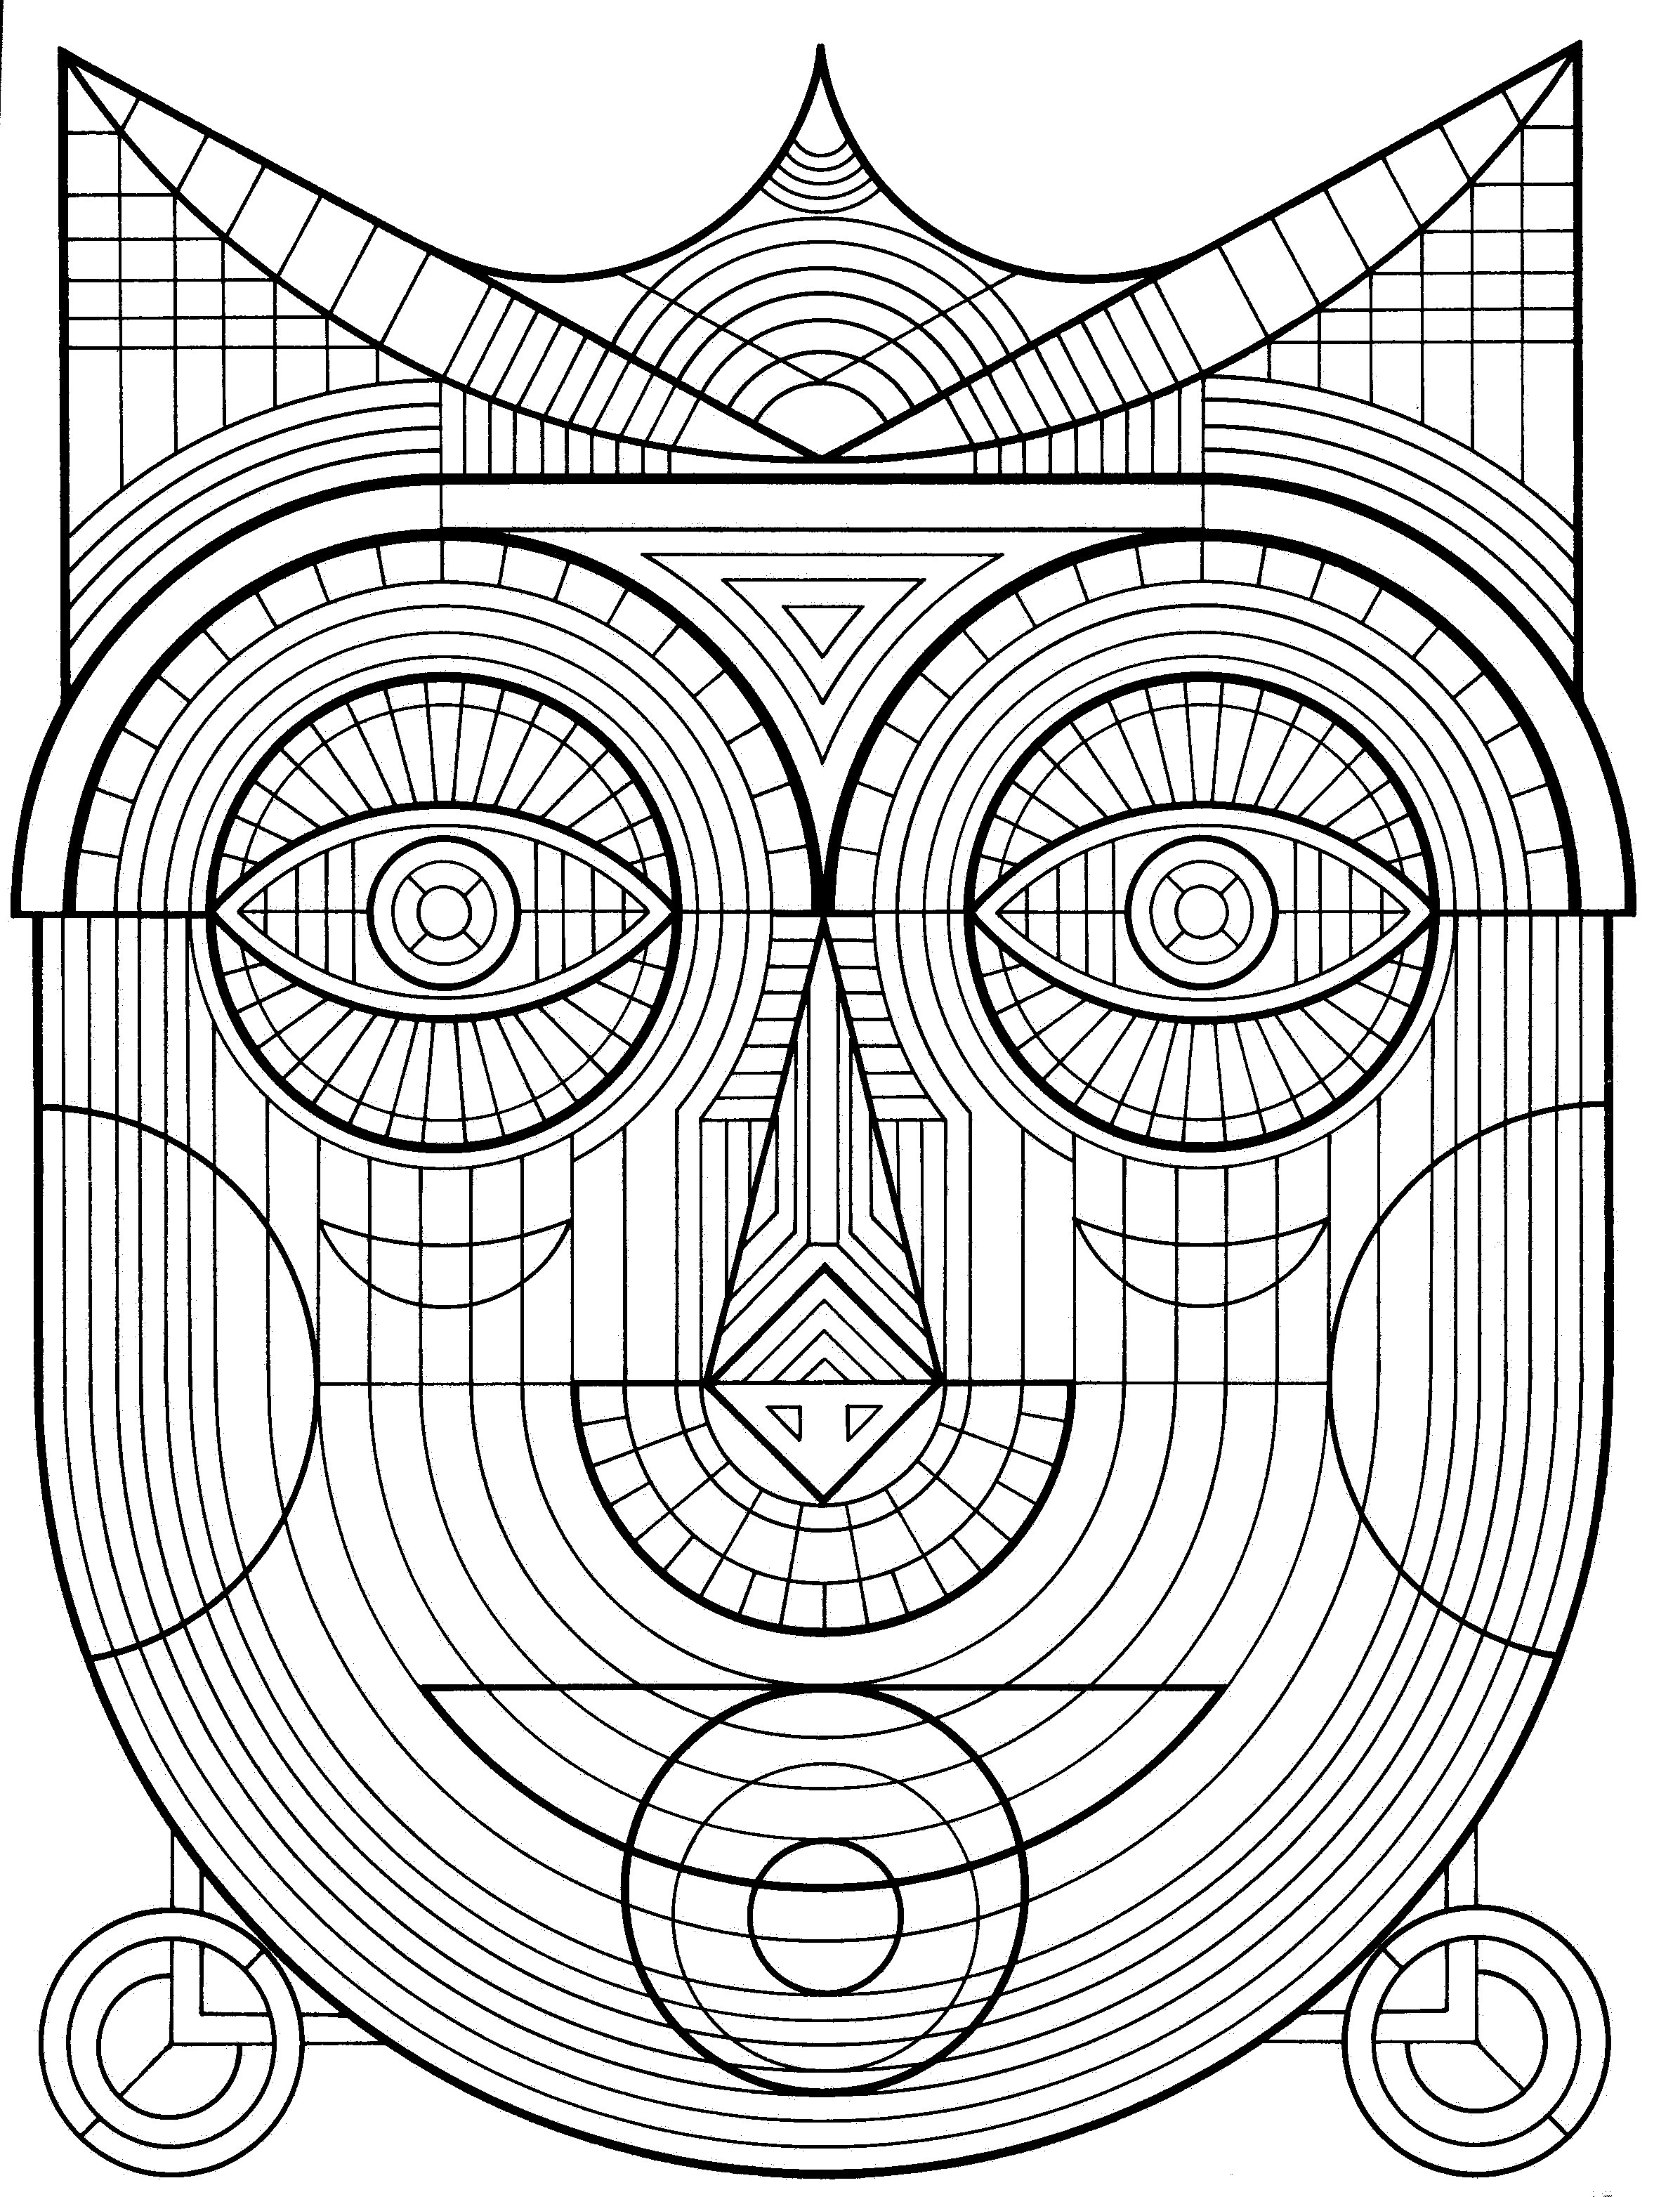 Cool Geometric Design Coloring Pages - Coloring Home